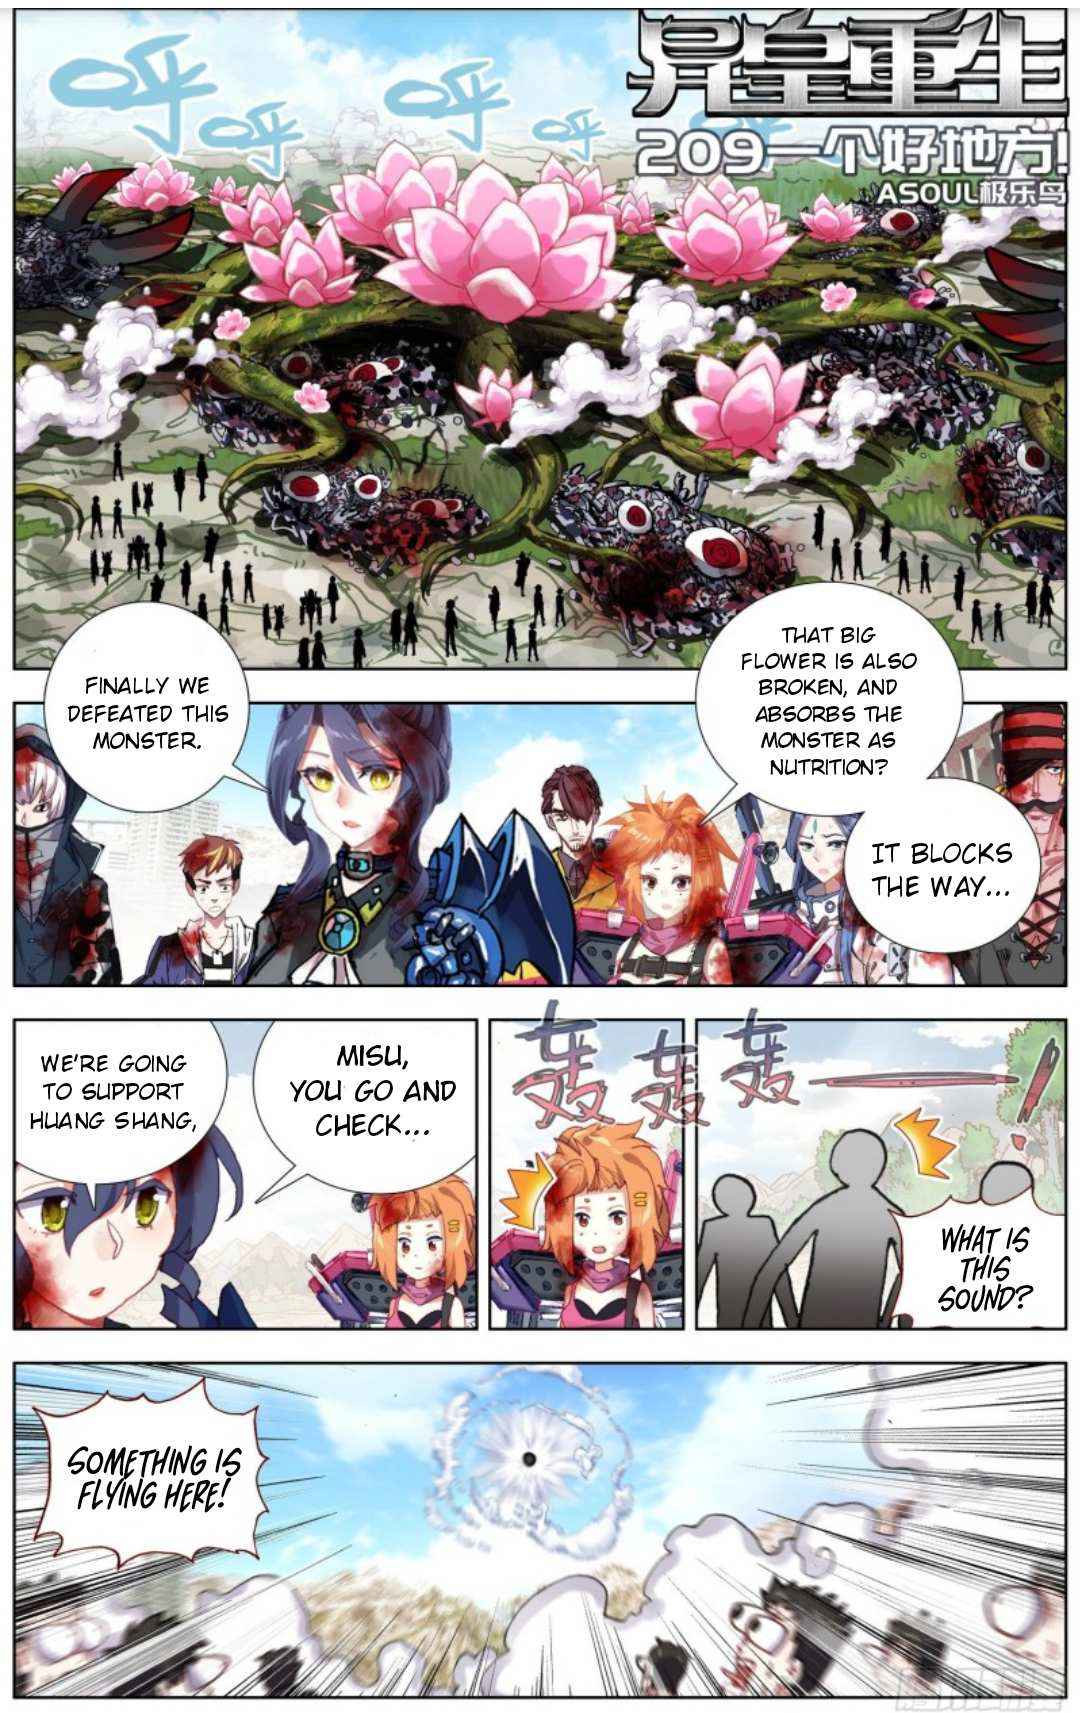 Different Kings Chapter 209-fix-eng-li - Page 1